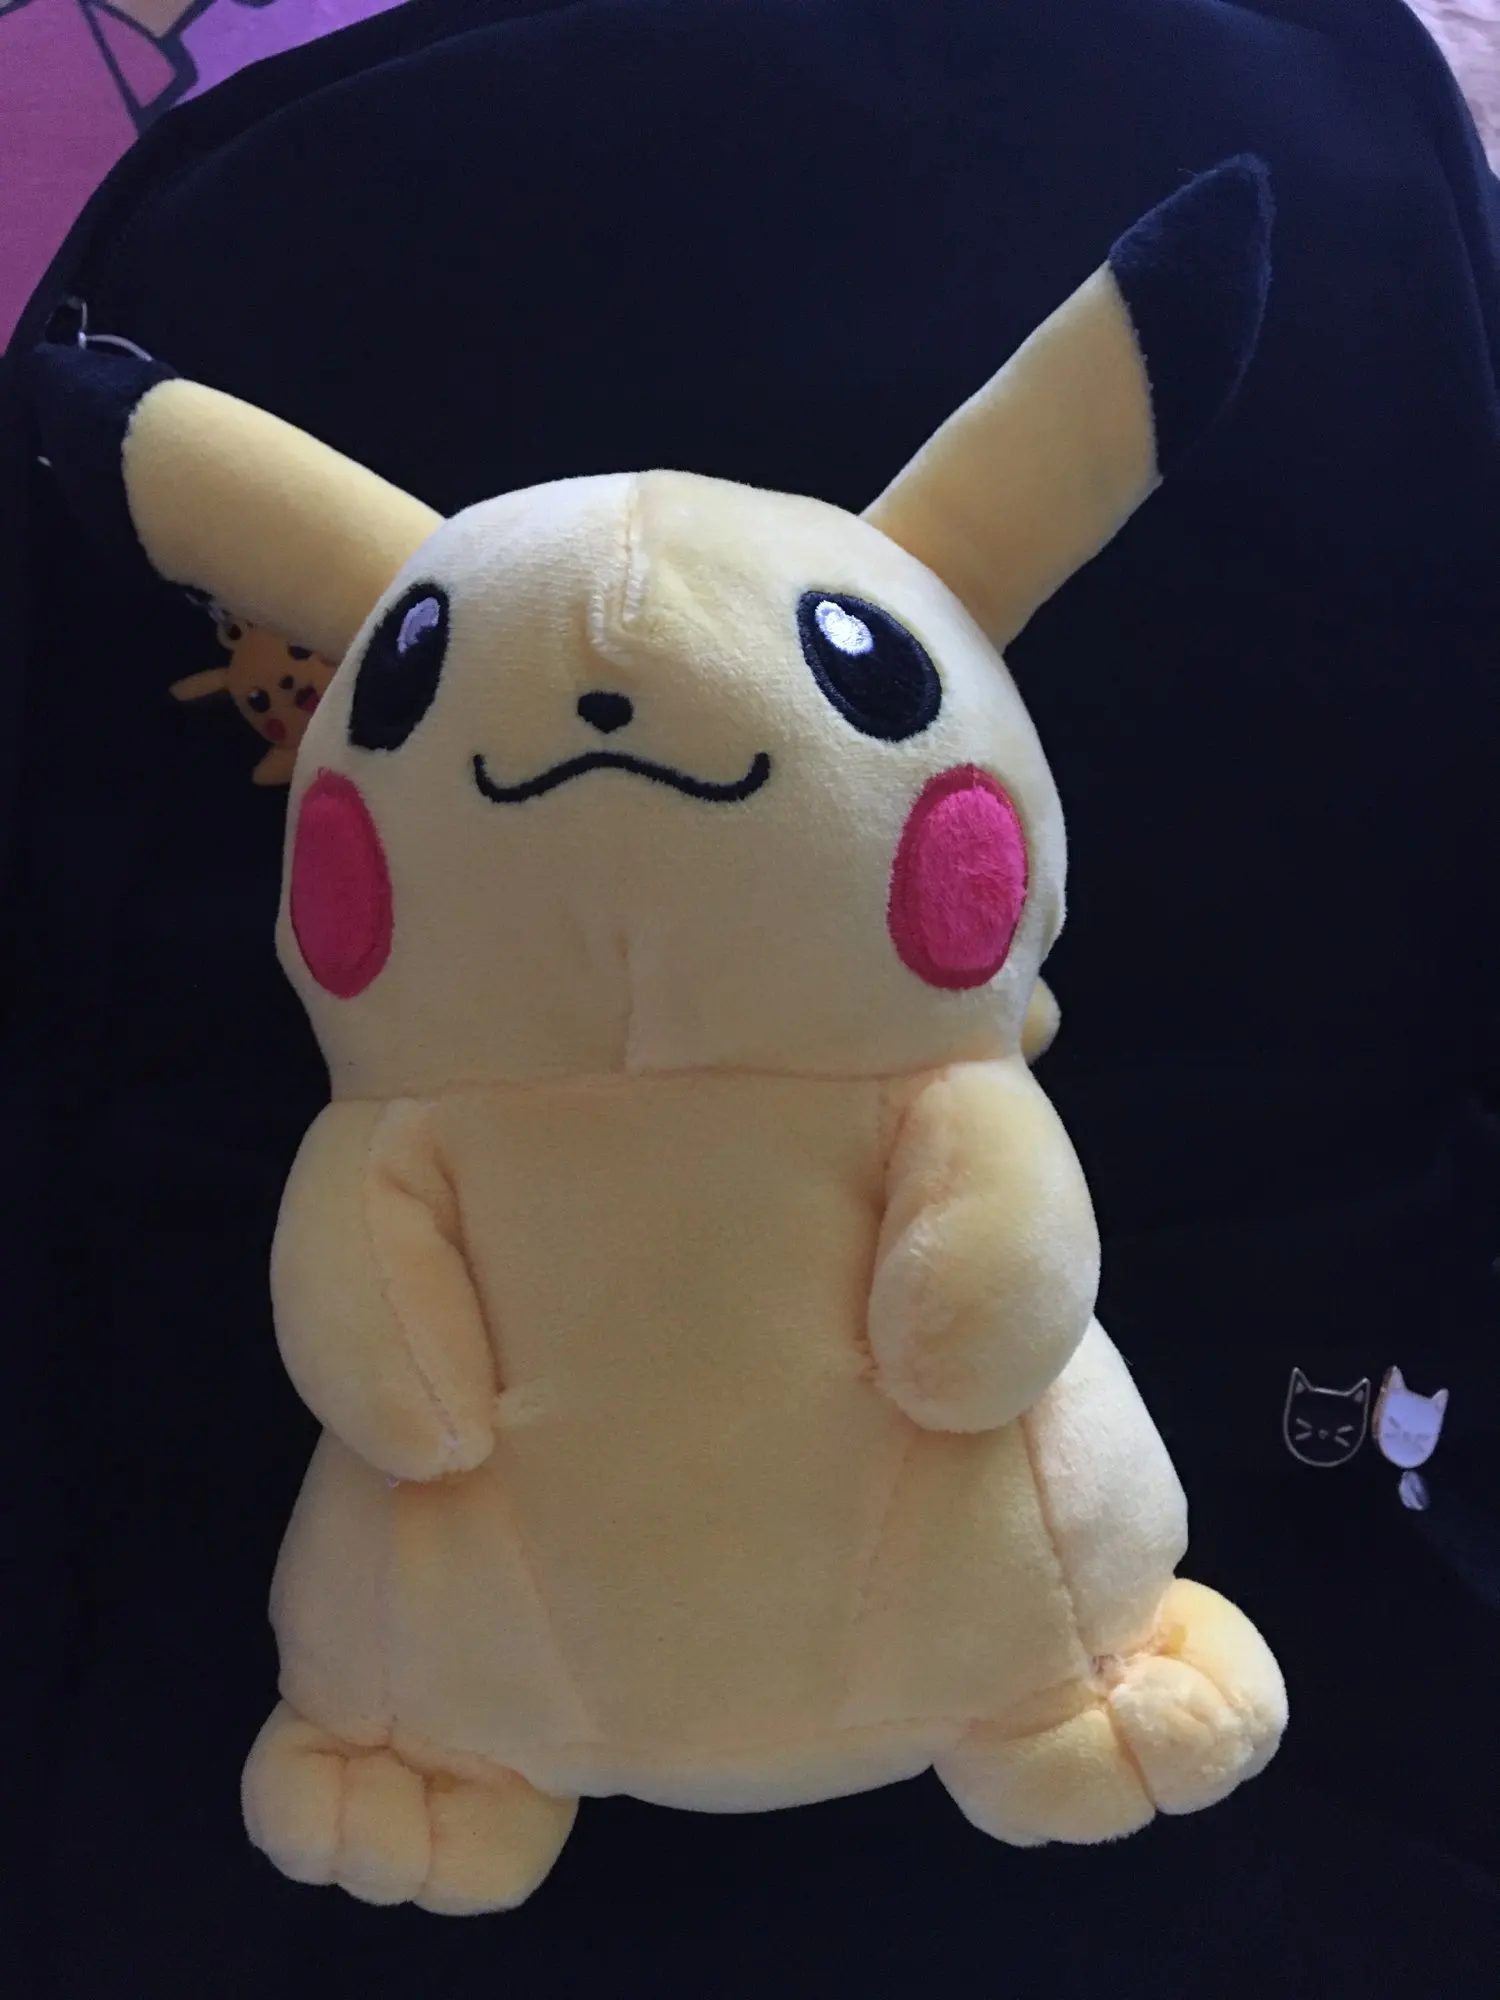 41 Styles Pokemon Plush Doll Pikachu Stuffed Toy Bulbasaur Squirtle Charmander Eevee Jigglypuff Gengar Mewtwo Lucario Kids Gifts photo review